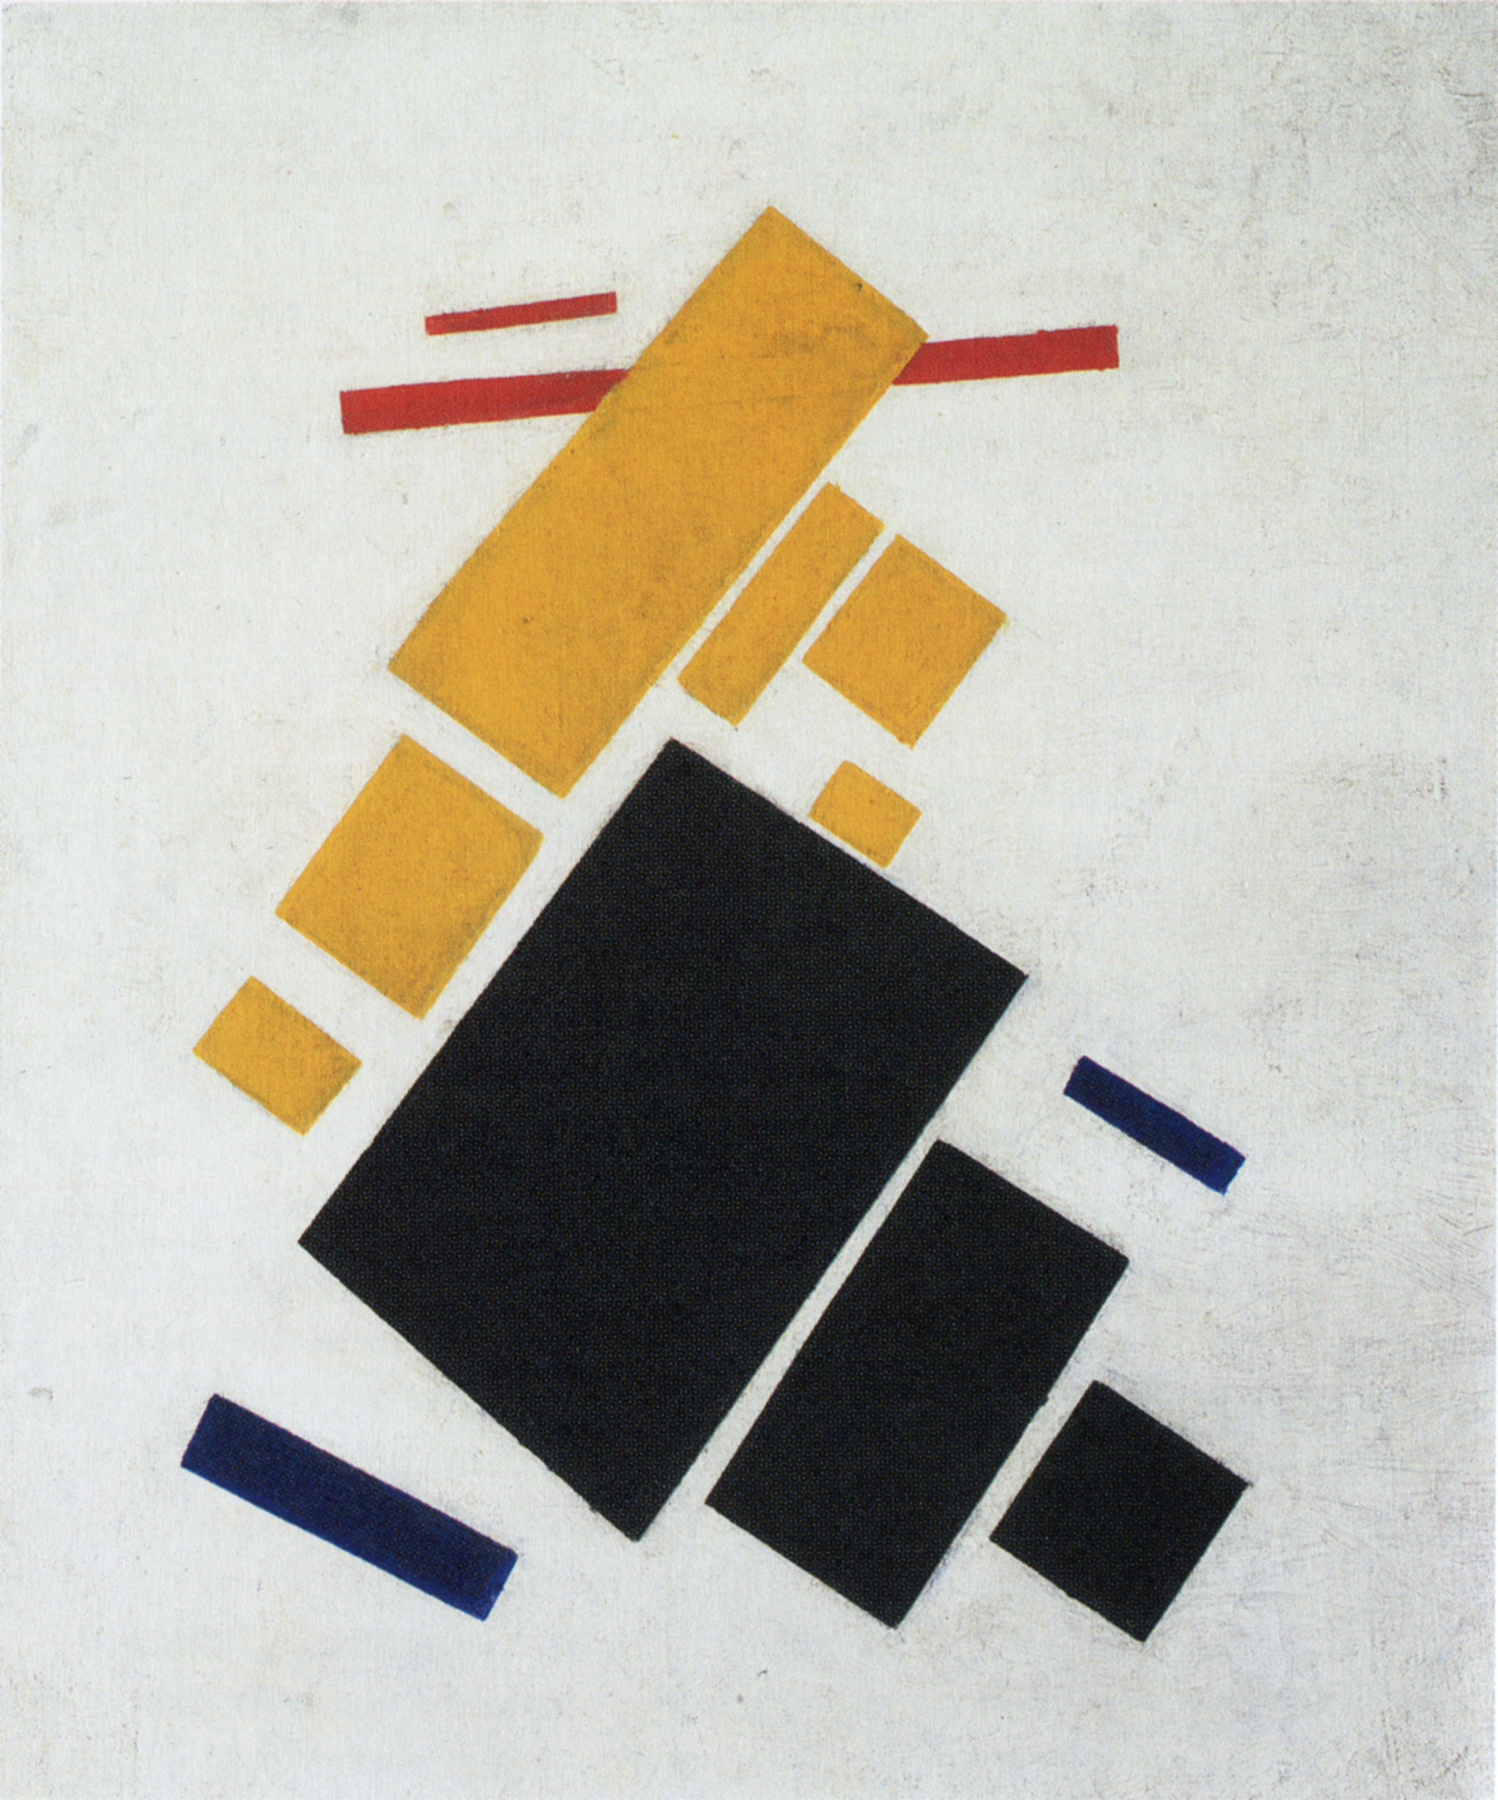 Suprematist Composition: Airplane Flying by Kazimir Malevich - 1915 - 58 x 48 cm Museum of Modern Art